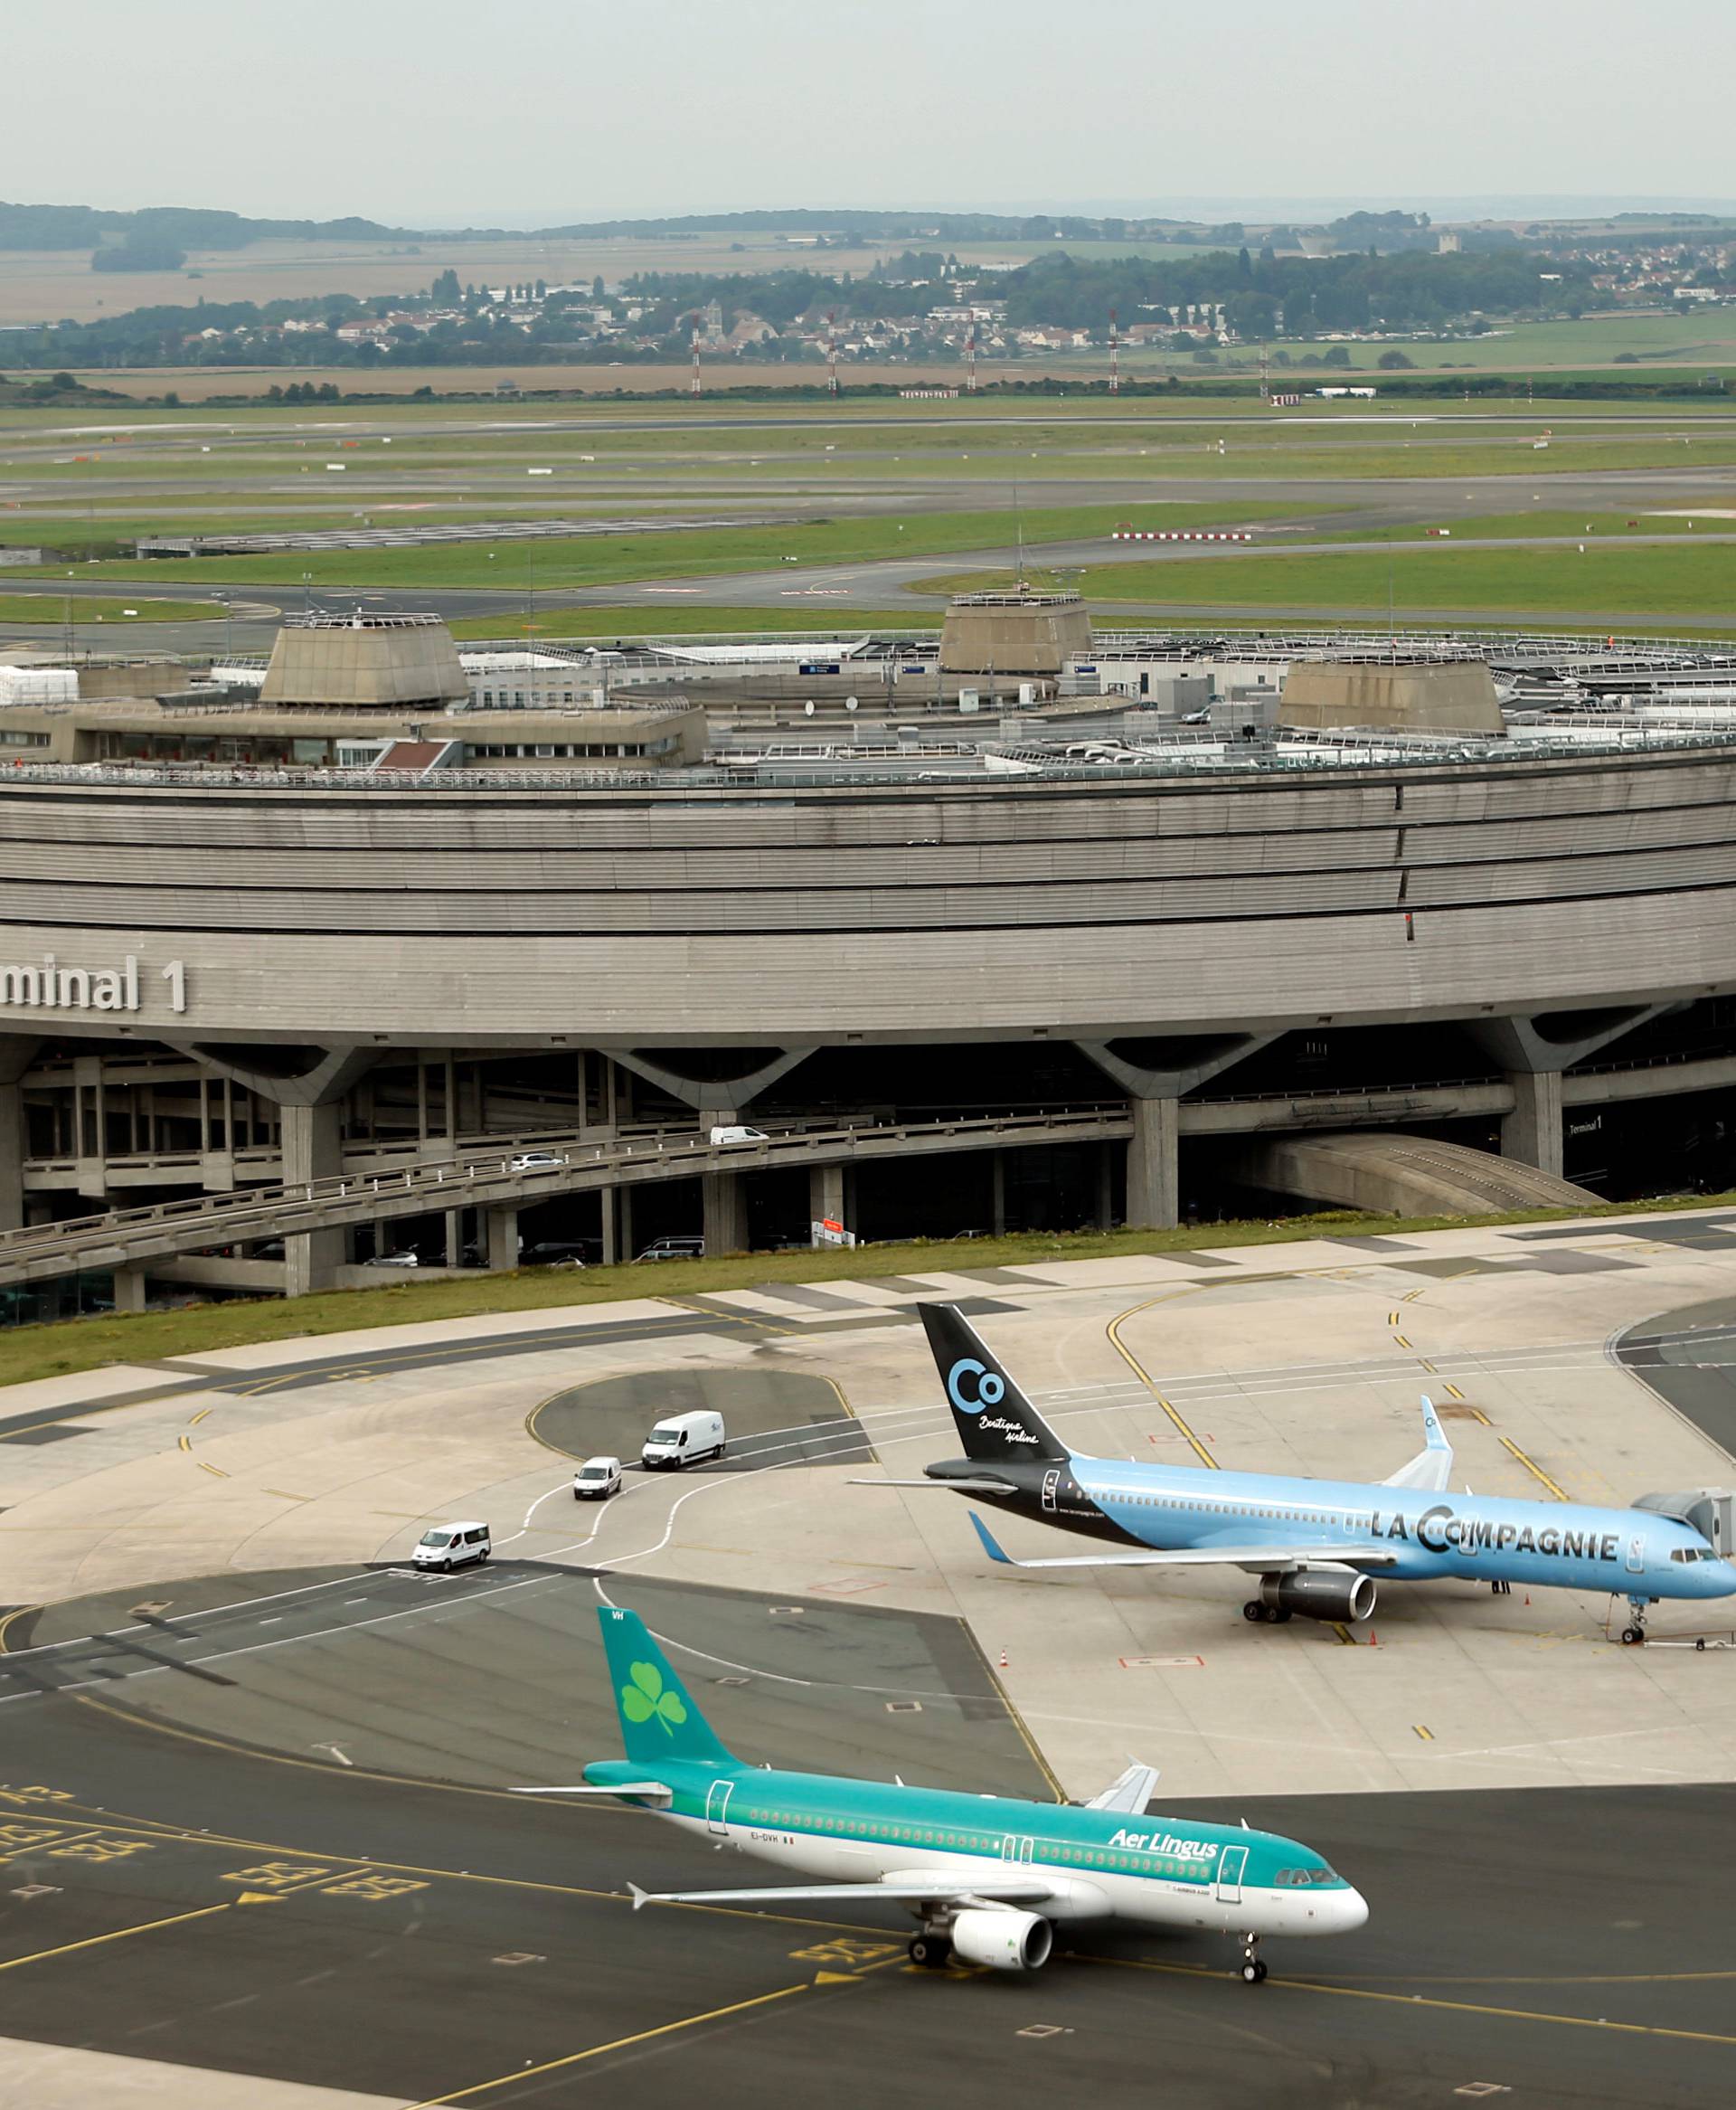 FILE PHOTO - A general view shows the Terminal 1 at the Charles de Gaulle International Airport in Roissy, near Paris